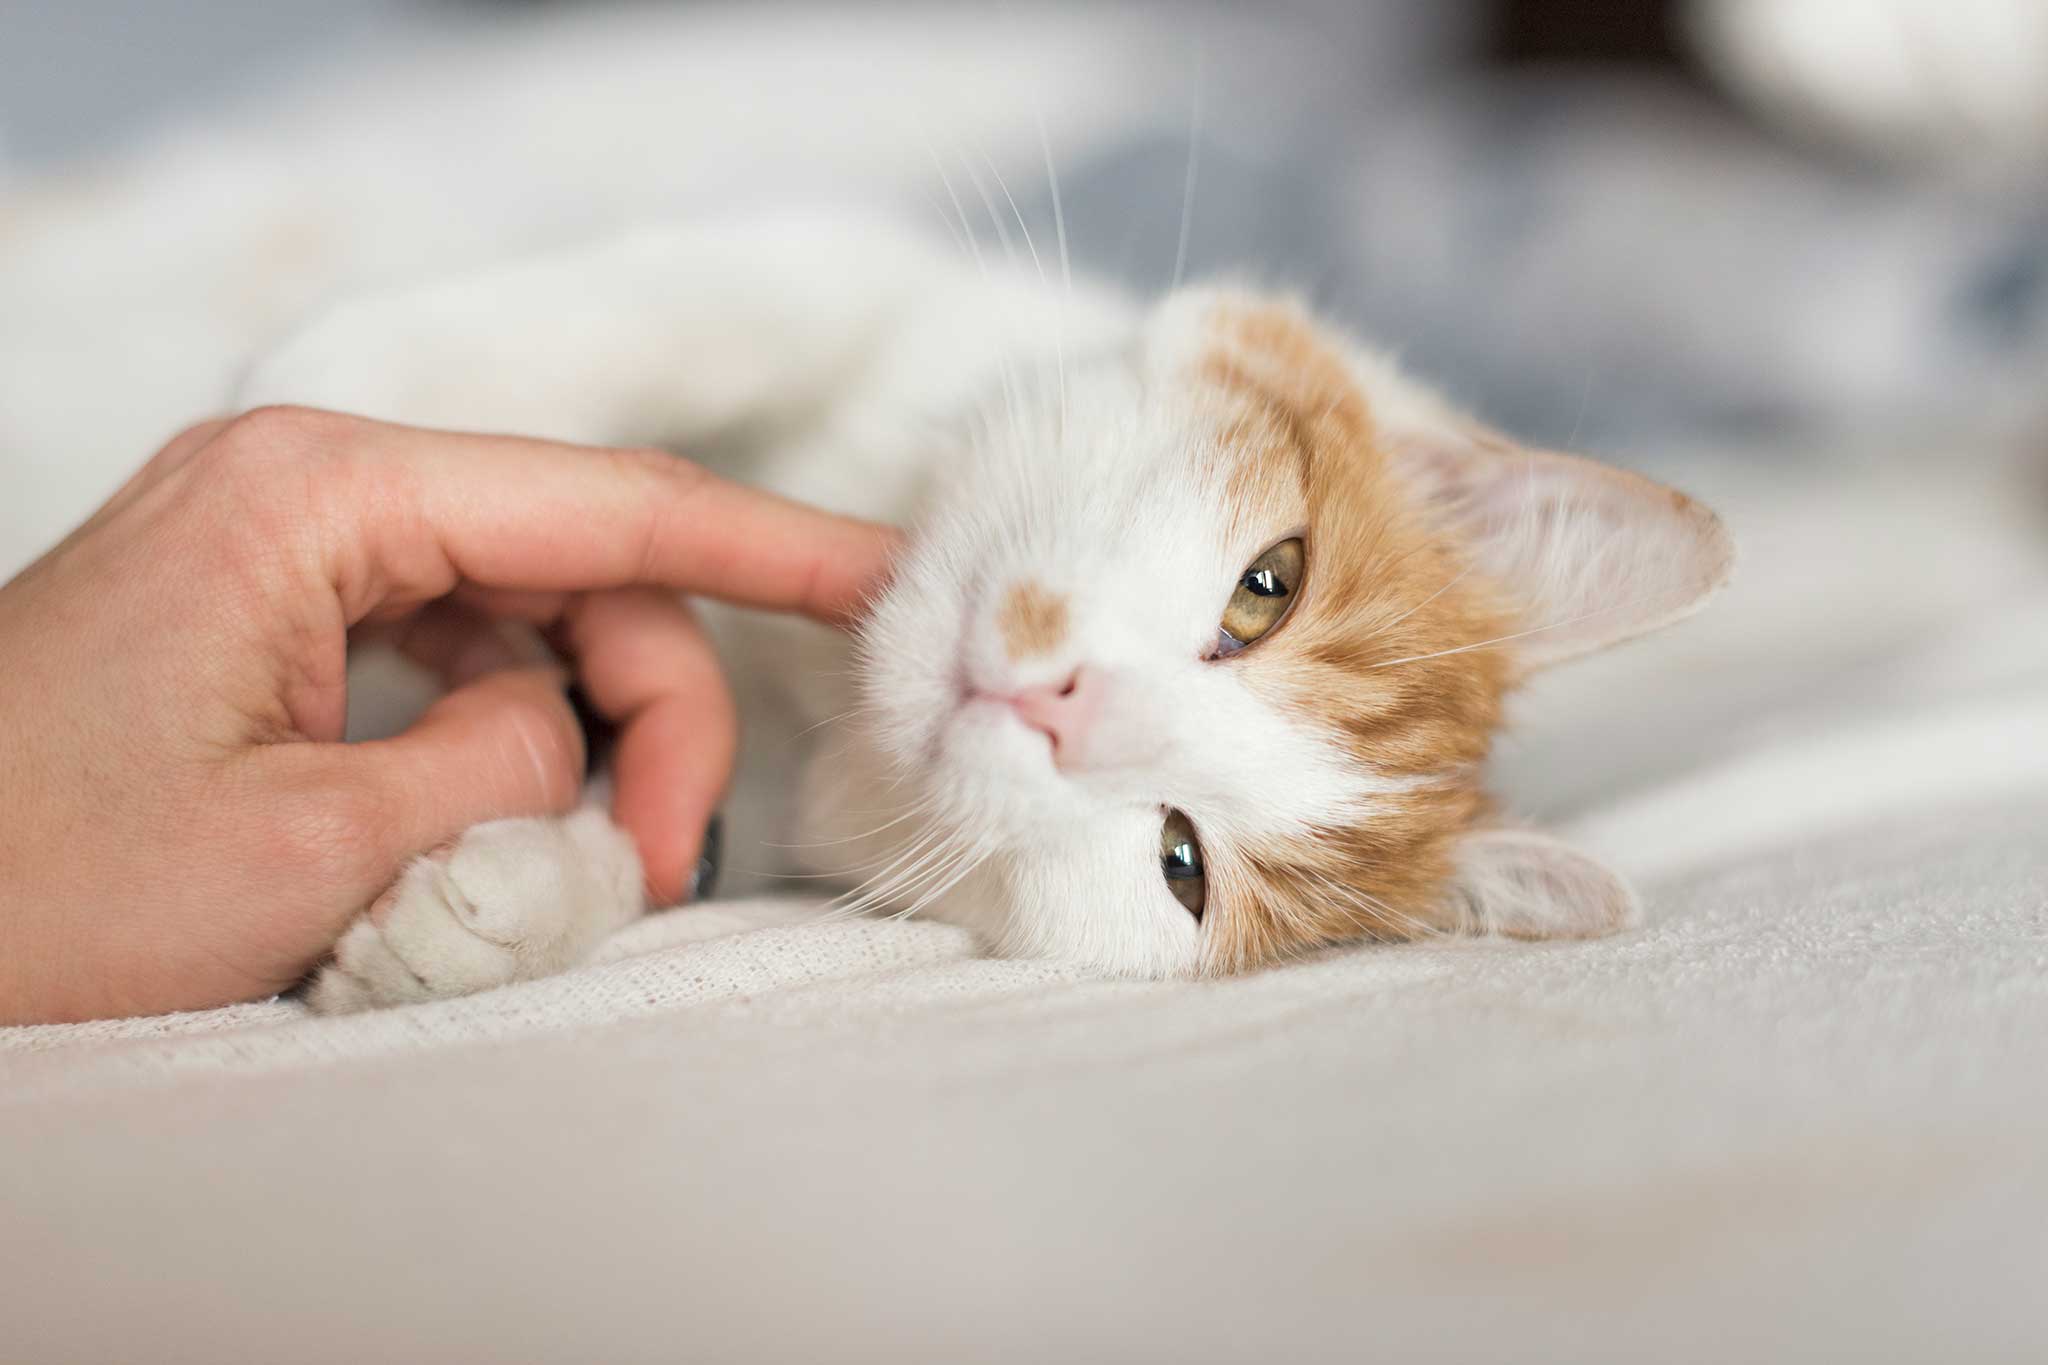 A white and tan cat being petted on a bed